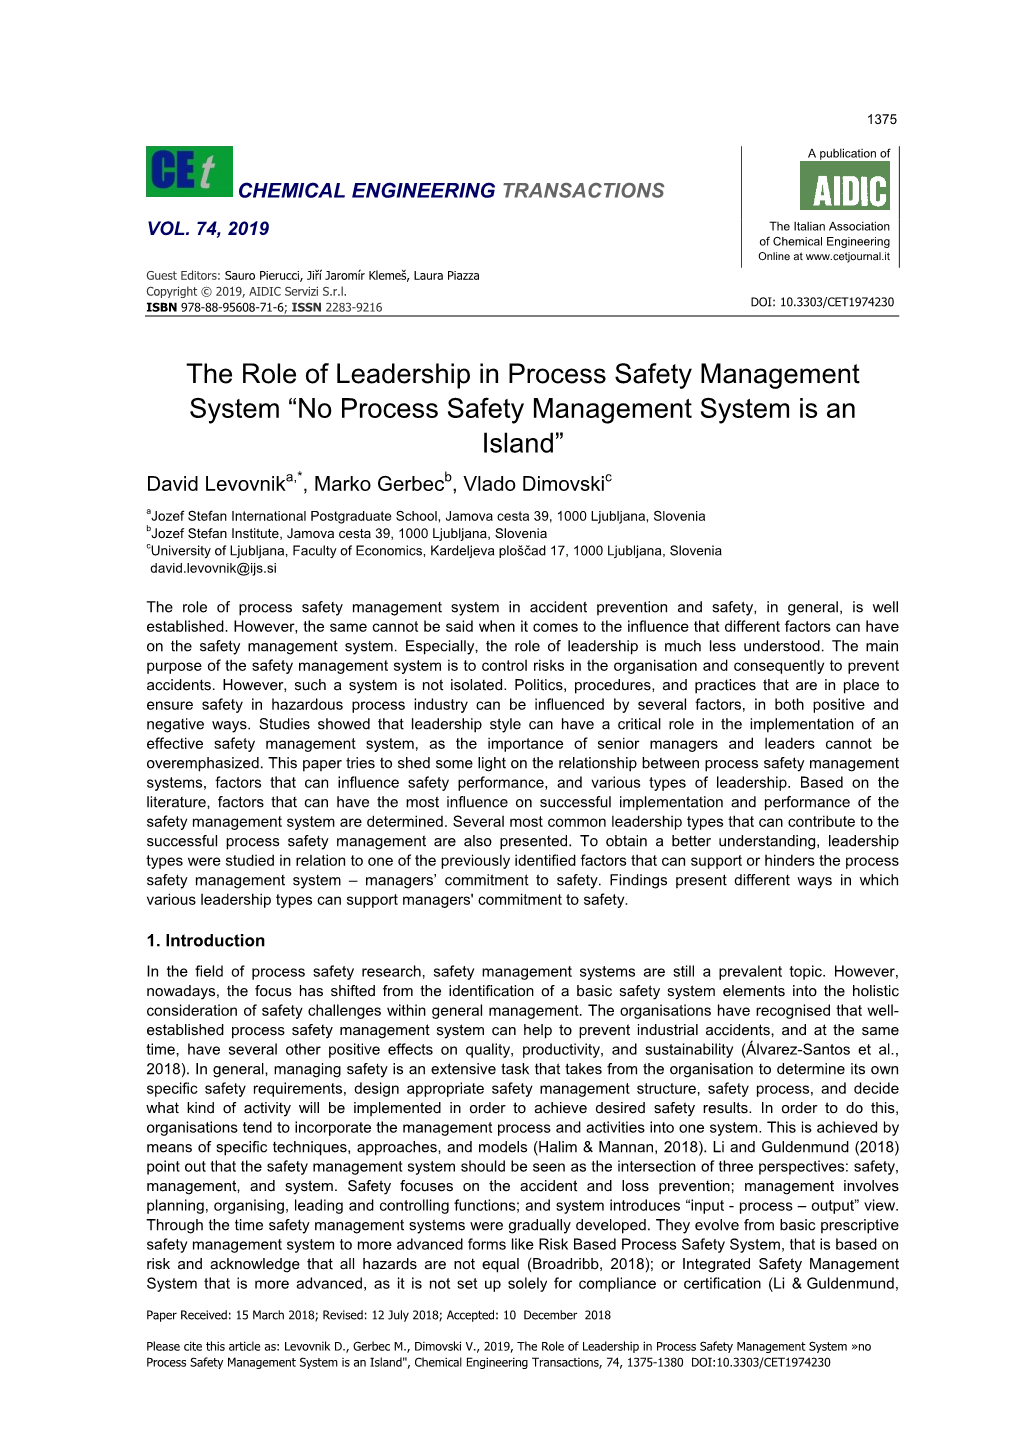 The Role of Leadership in Process Safety Management System